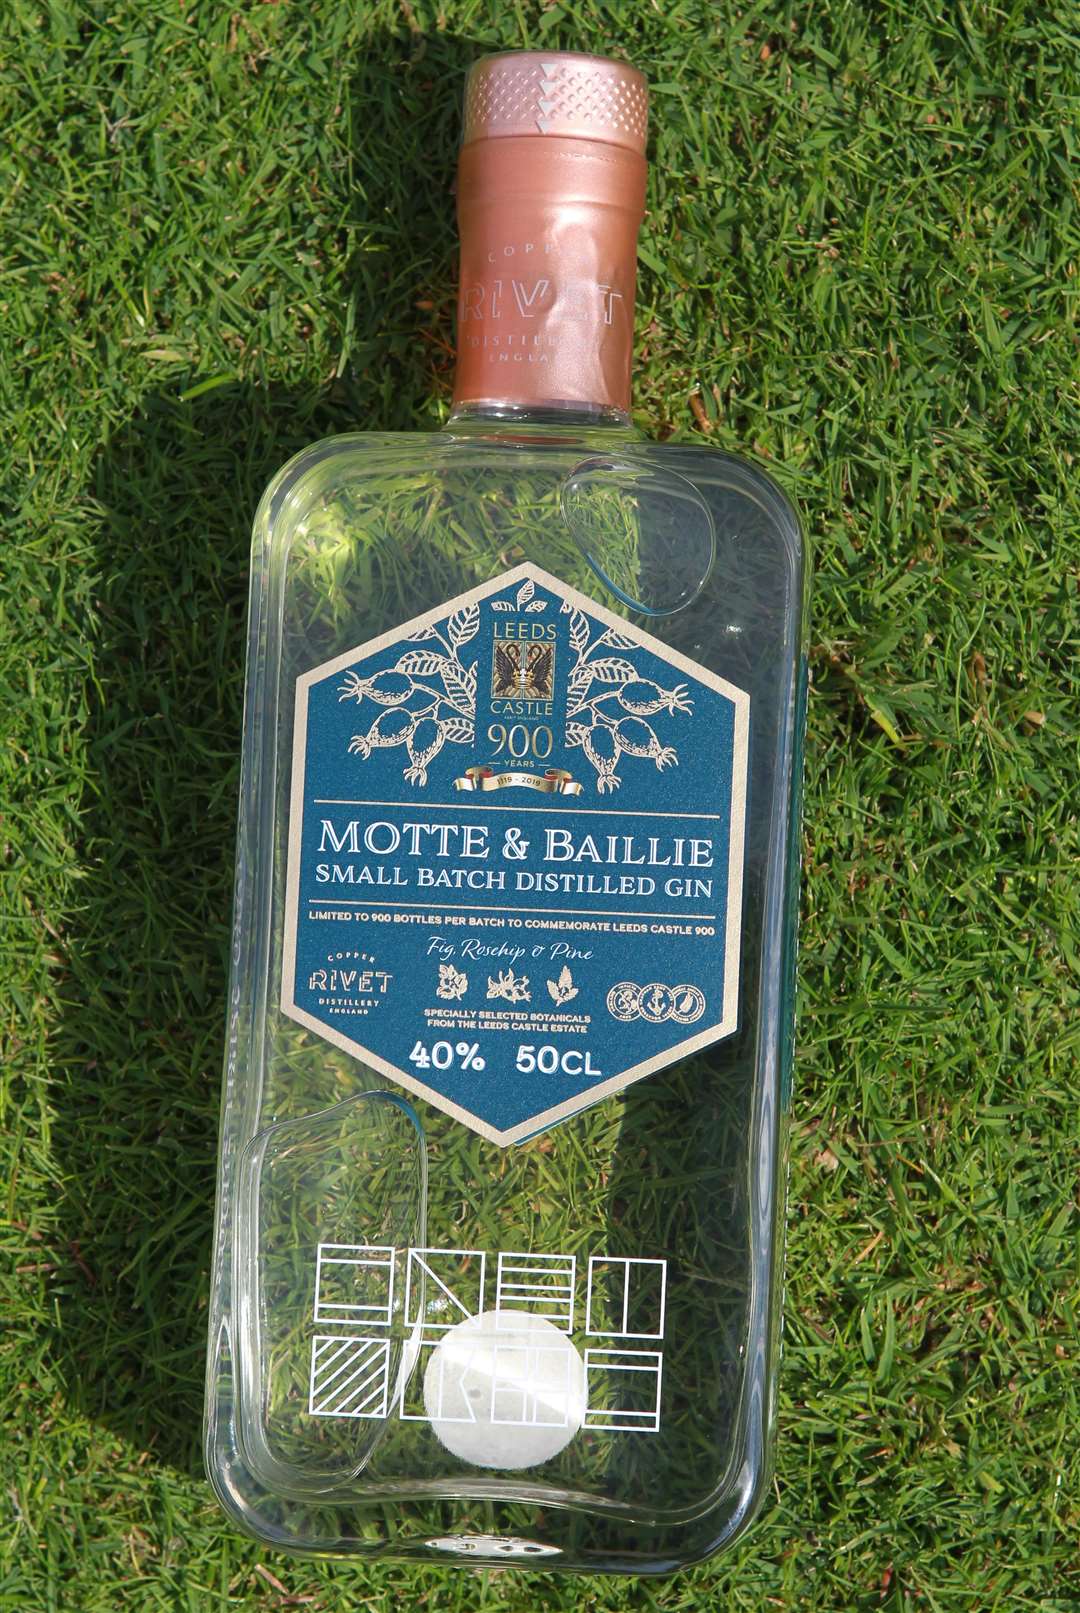 Leeds Castle Motte & Baillie Gin is going into the time capsule Picture: John Westhrop